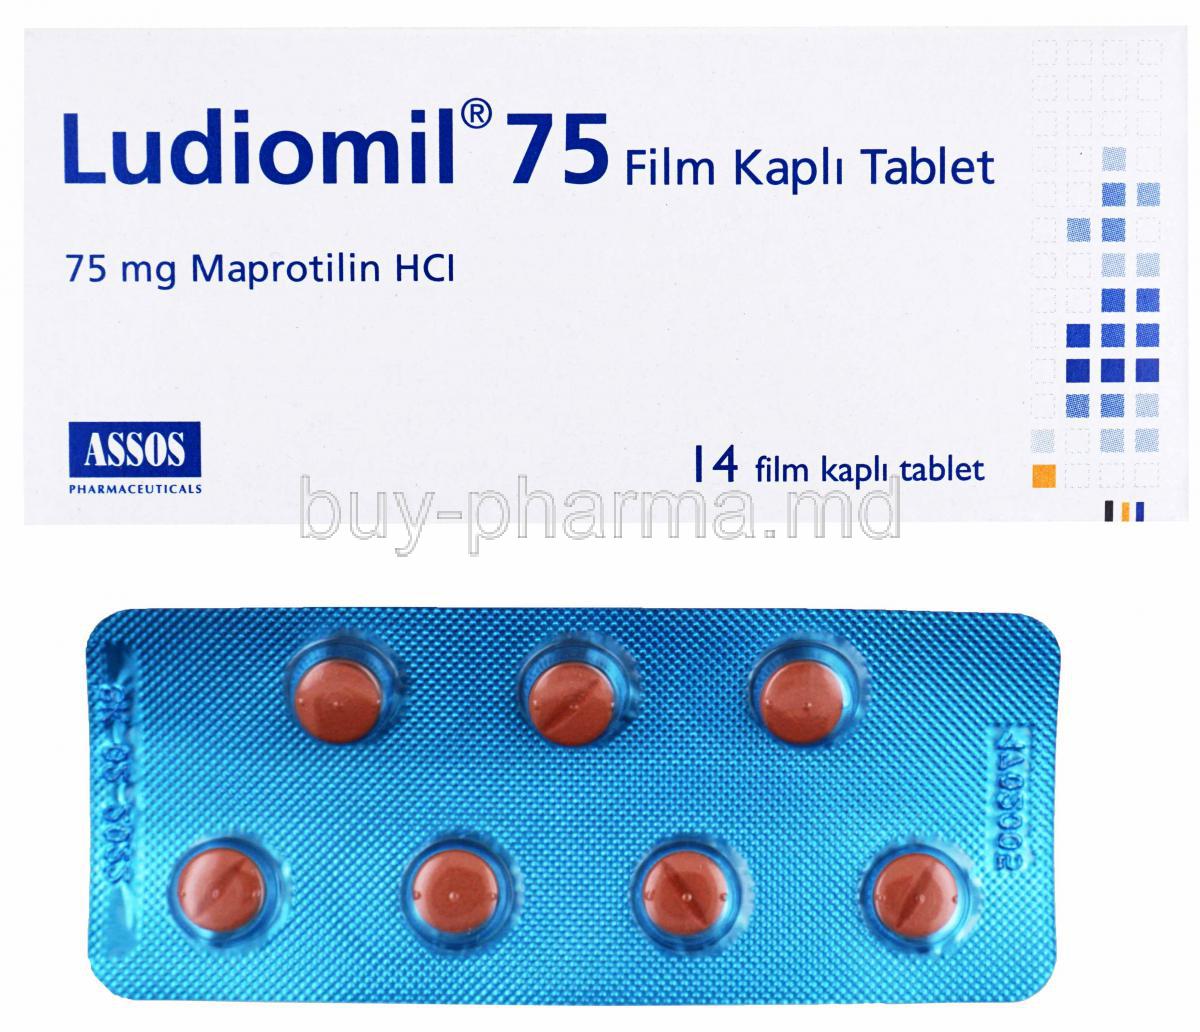 Ludiomil, Maprotiline, 75mg 14 tablets, Assos Pharmaceuticals, Box and blister pack front presentation